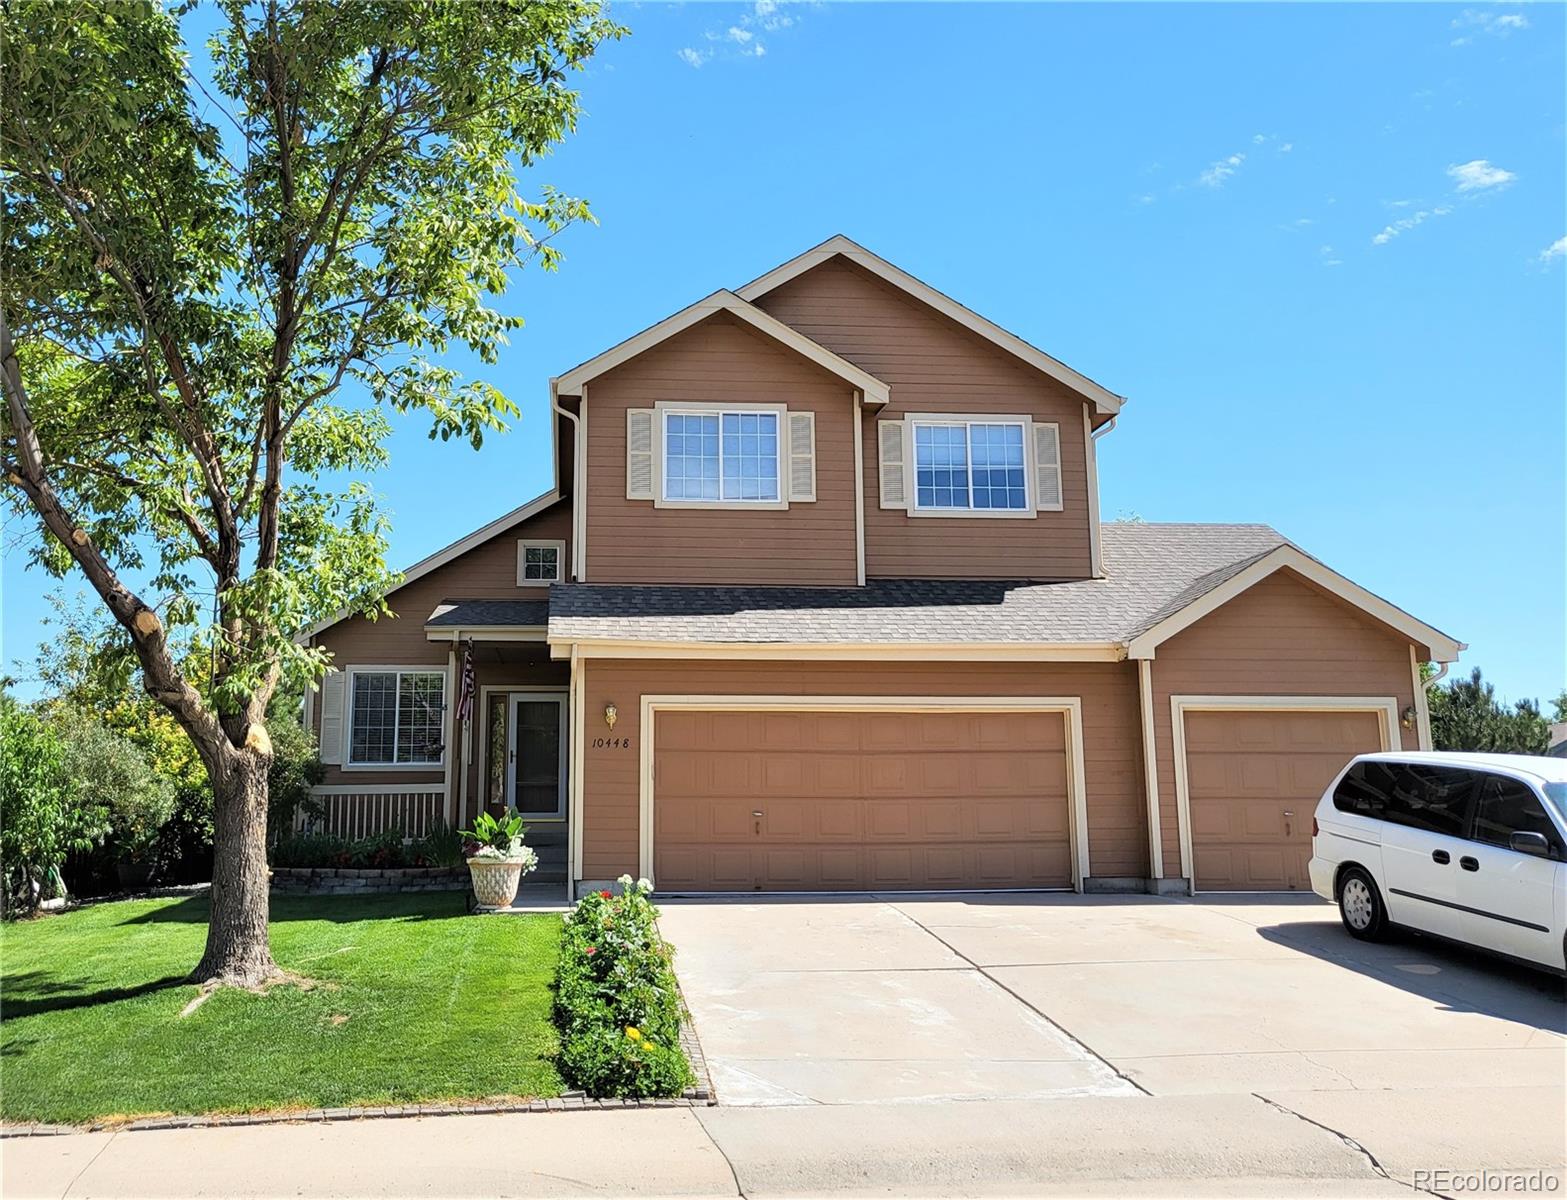 10448  Panther Trace, littleton MLS: 5676351 Beds: 4 Baths: 4 Price: $699,500